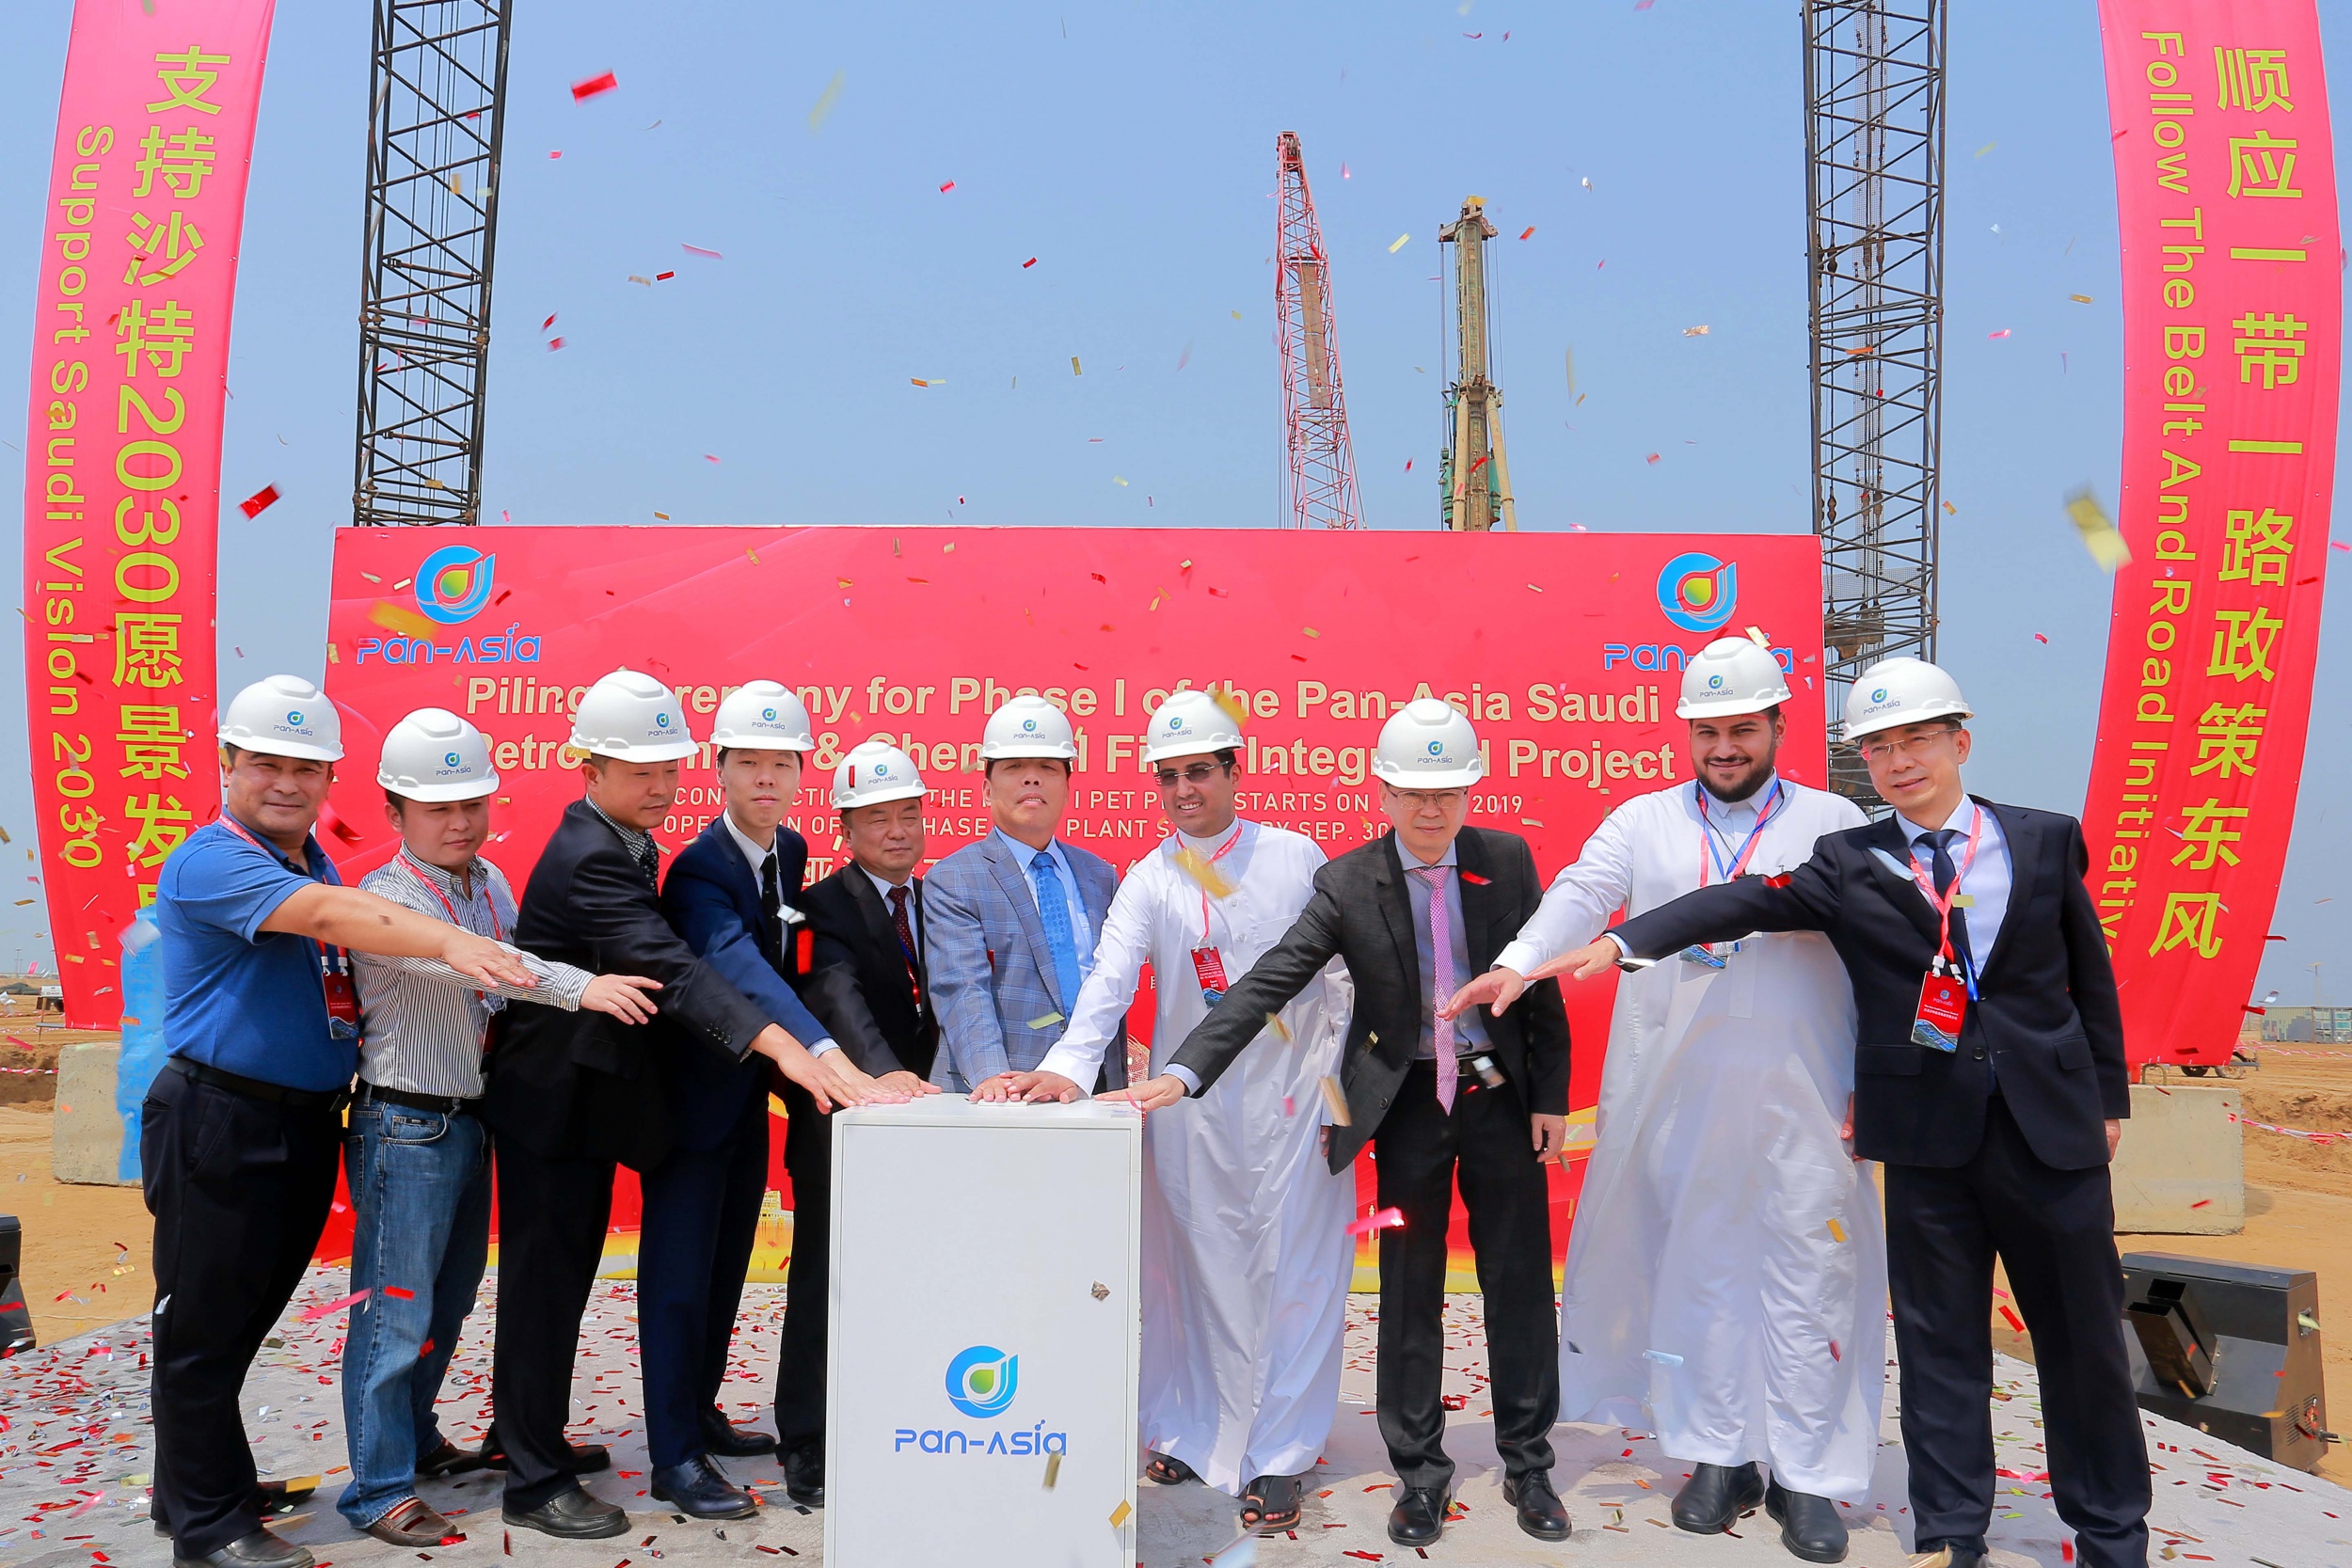 the Piling Ceremony for the Phase I PET Plant of Pan-Asia Saudi Project was held successfully